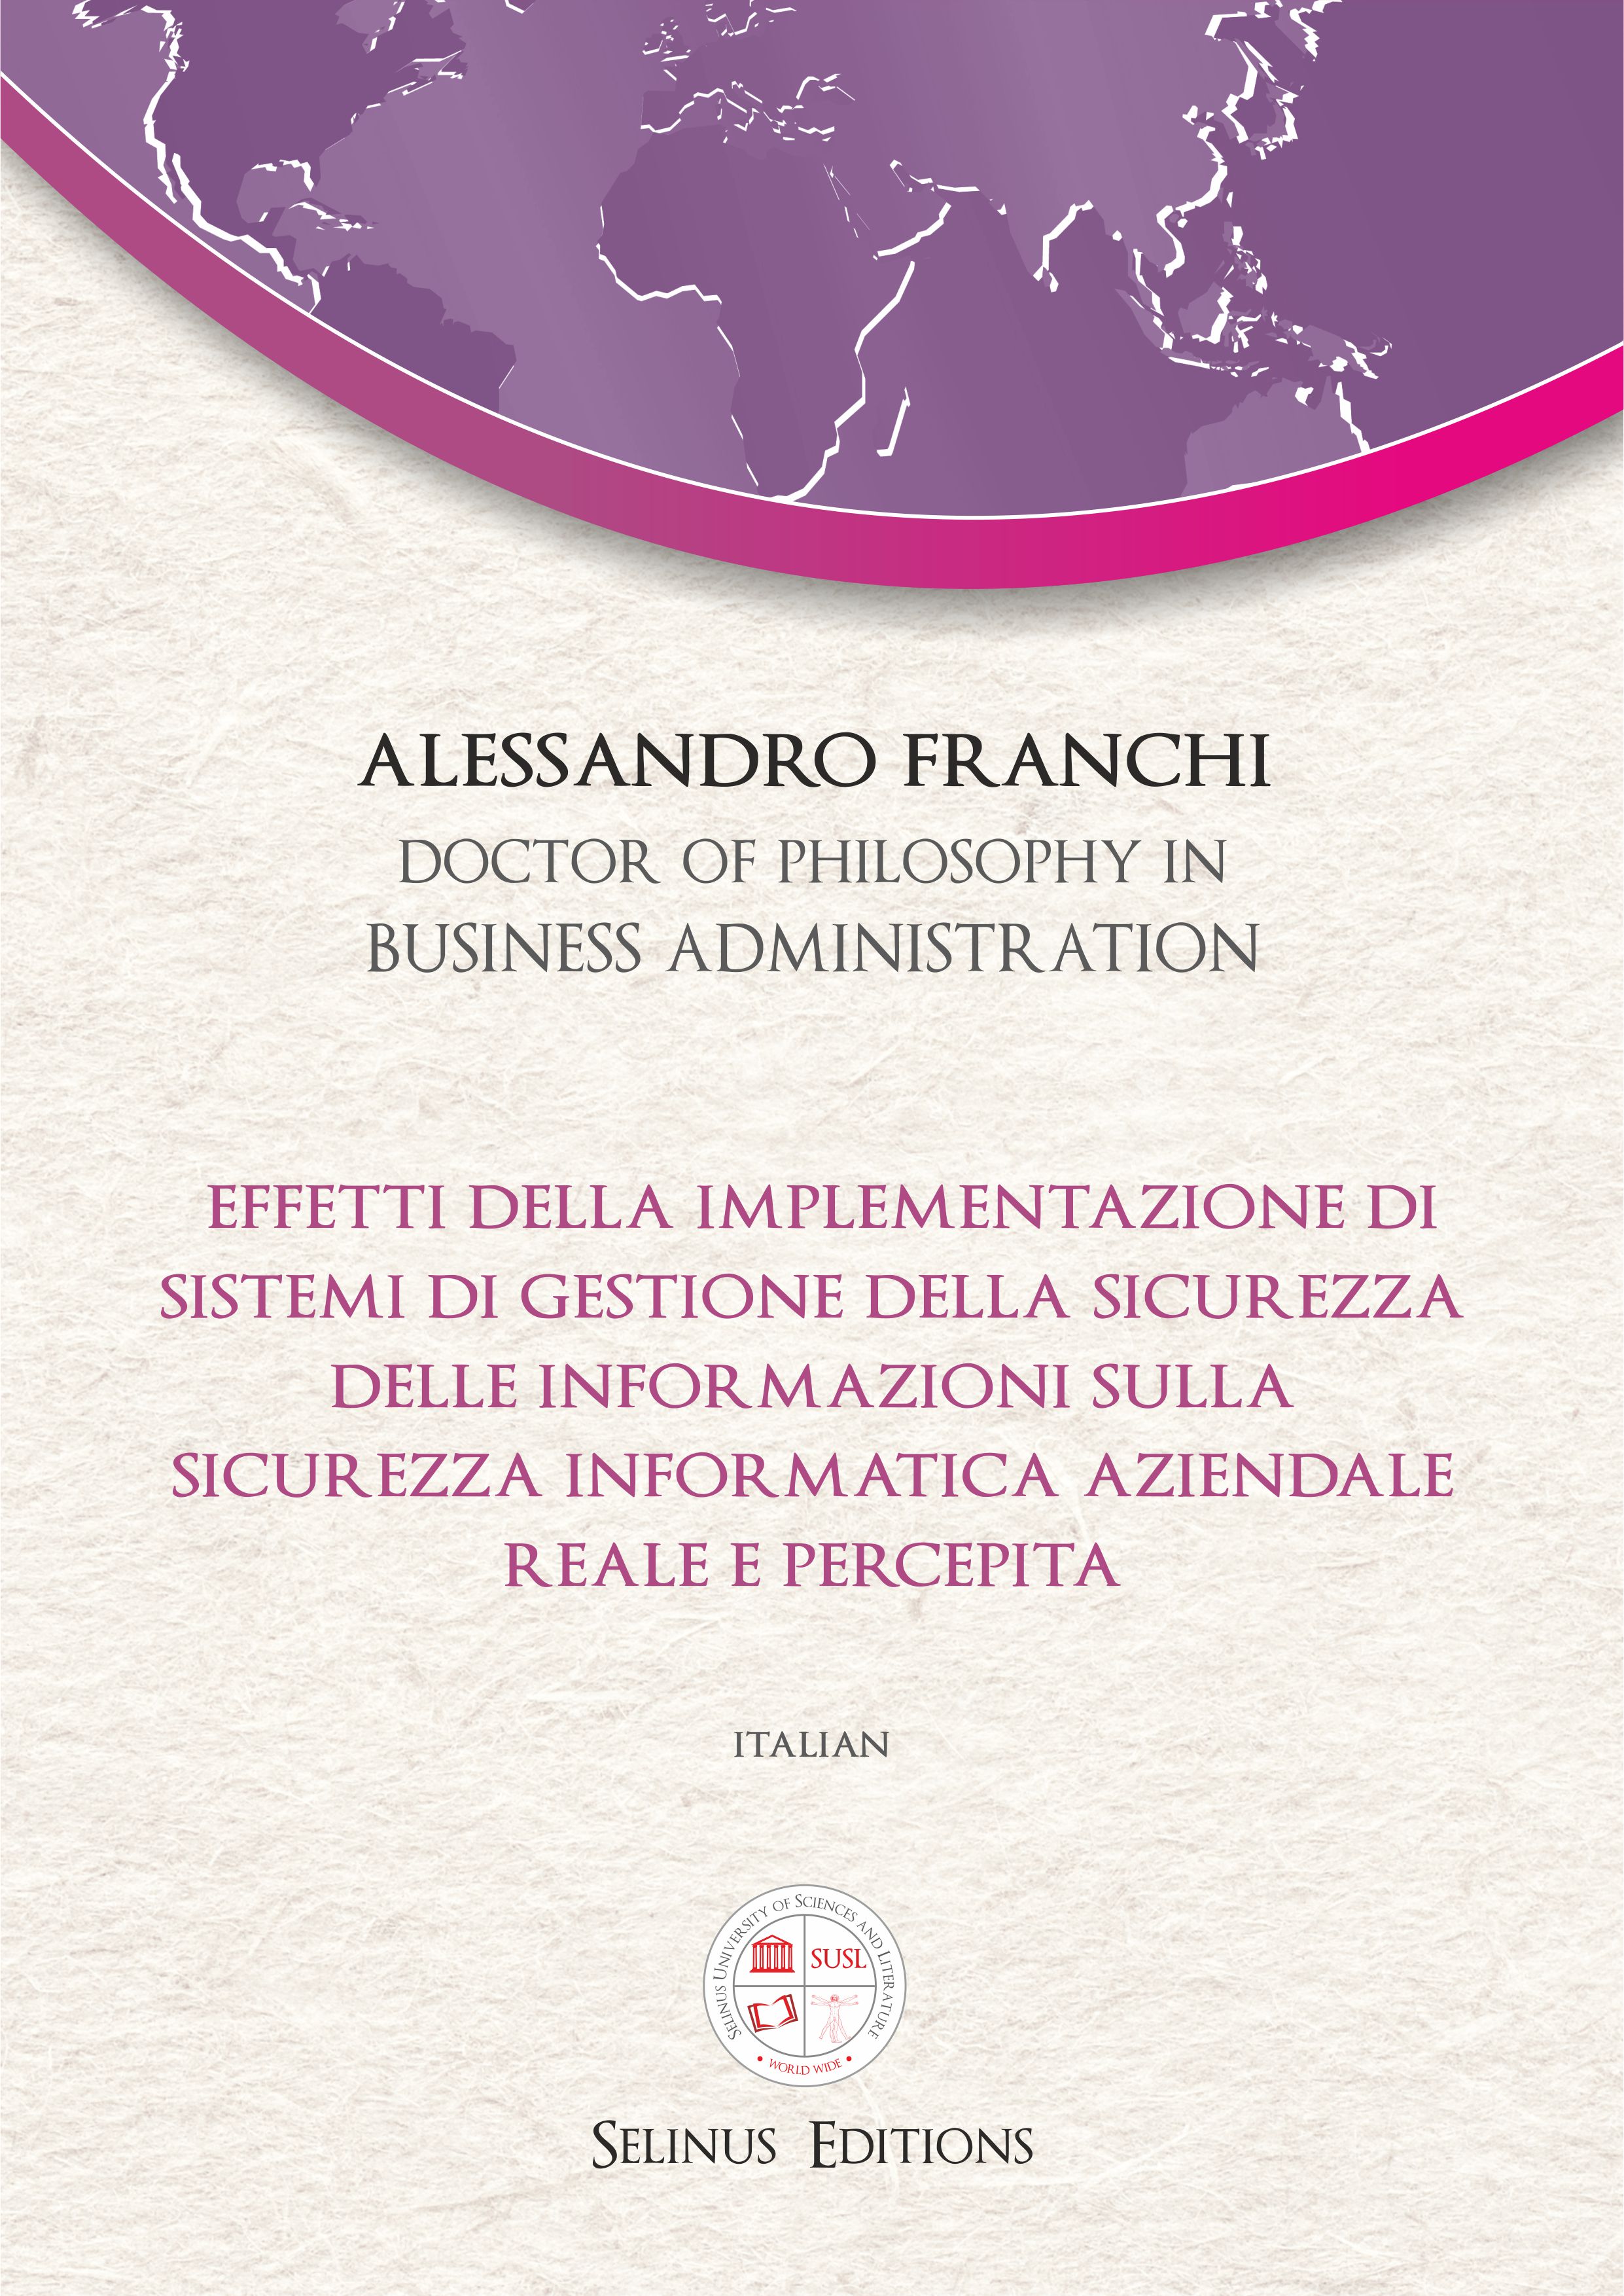 Thesis Alessandro Franchi